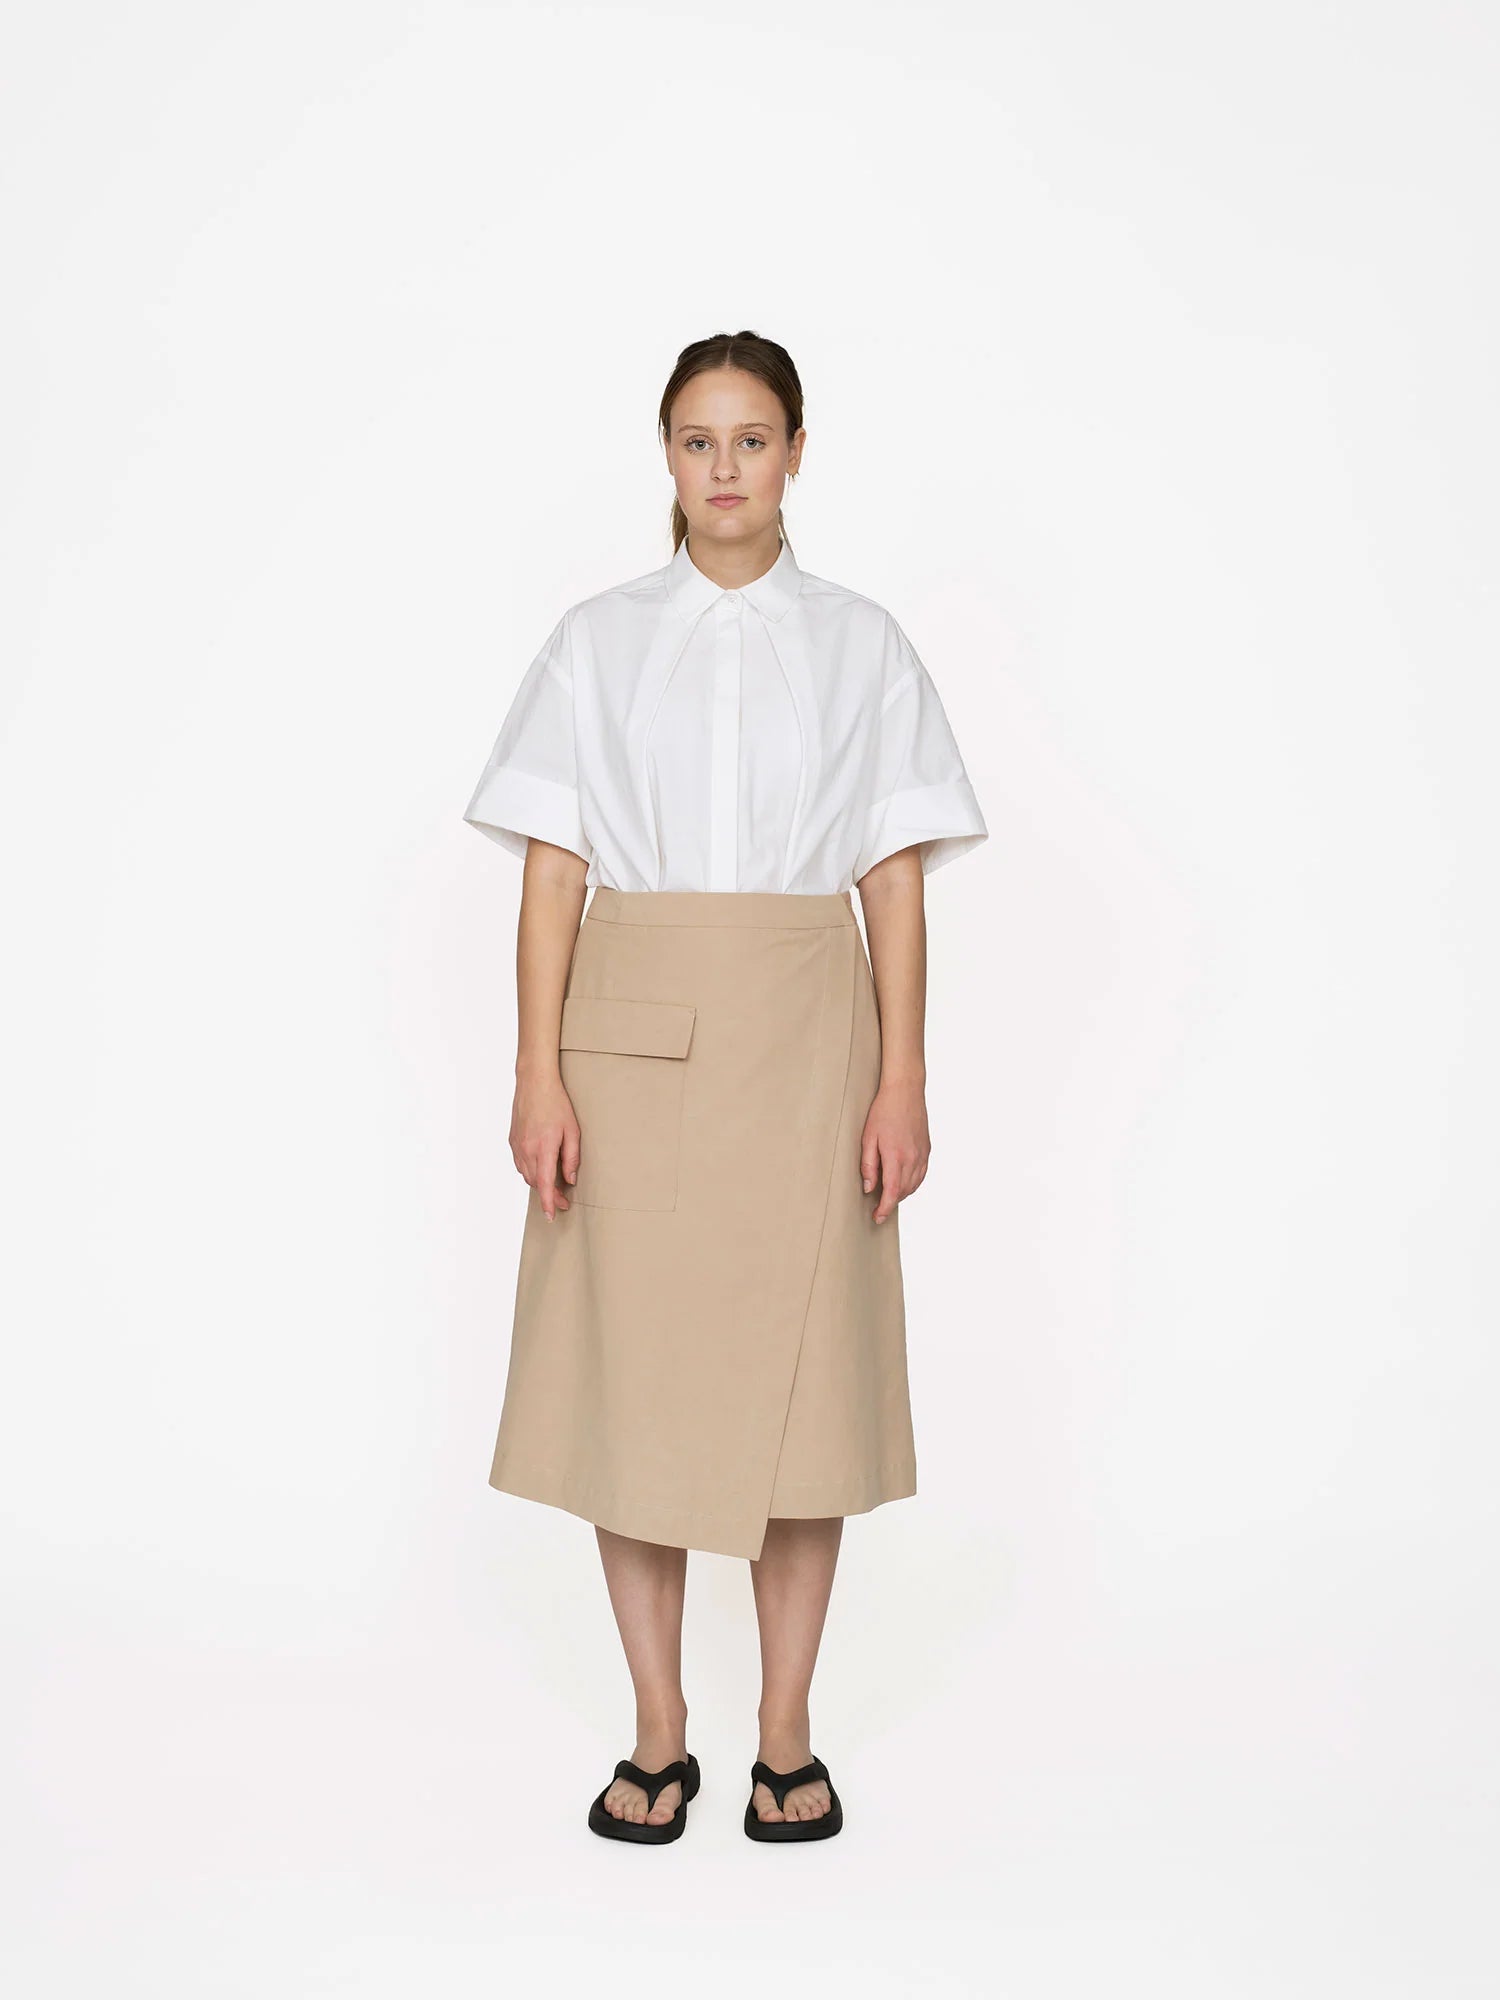 Asymmetric Midi Skirt sewing pattern by The Assembly Line